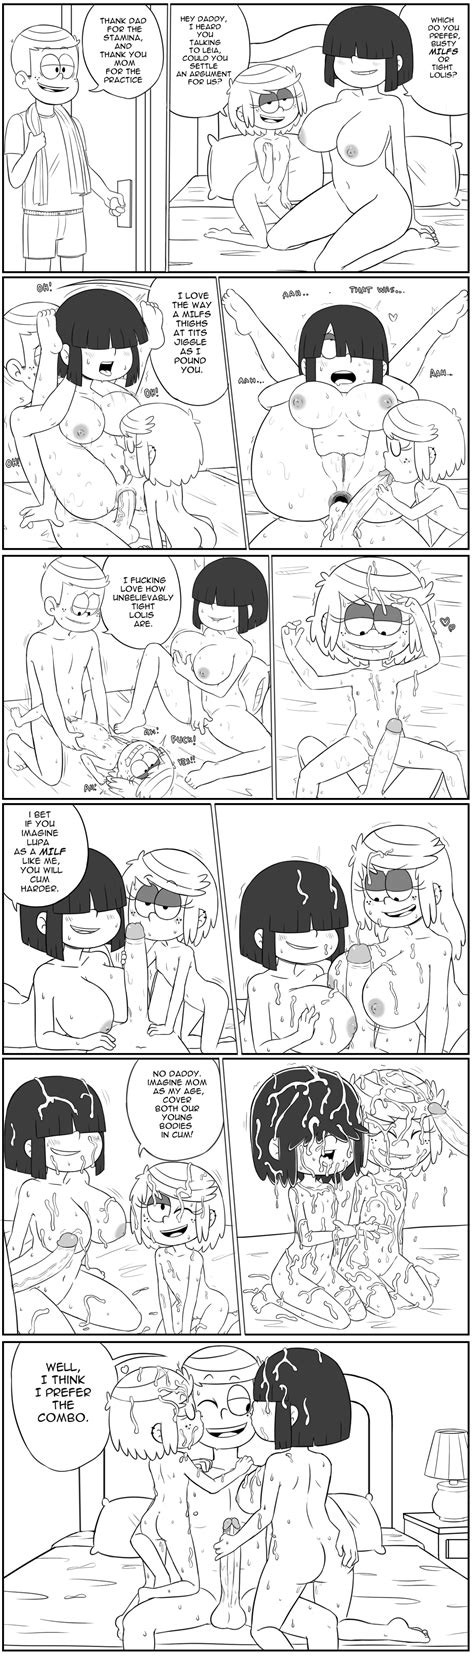 Post 3251819 Comic Lincolnloud Lucyloud Redkaze Theloudhouse